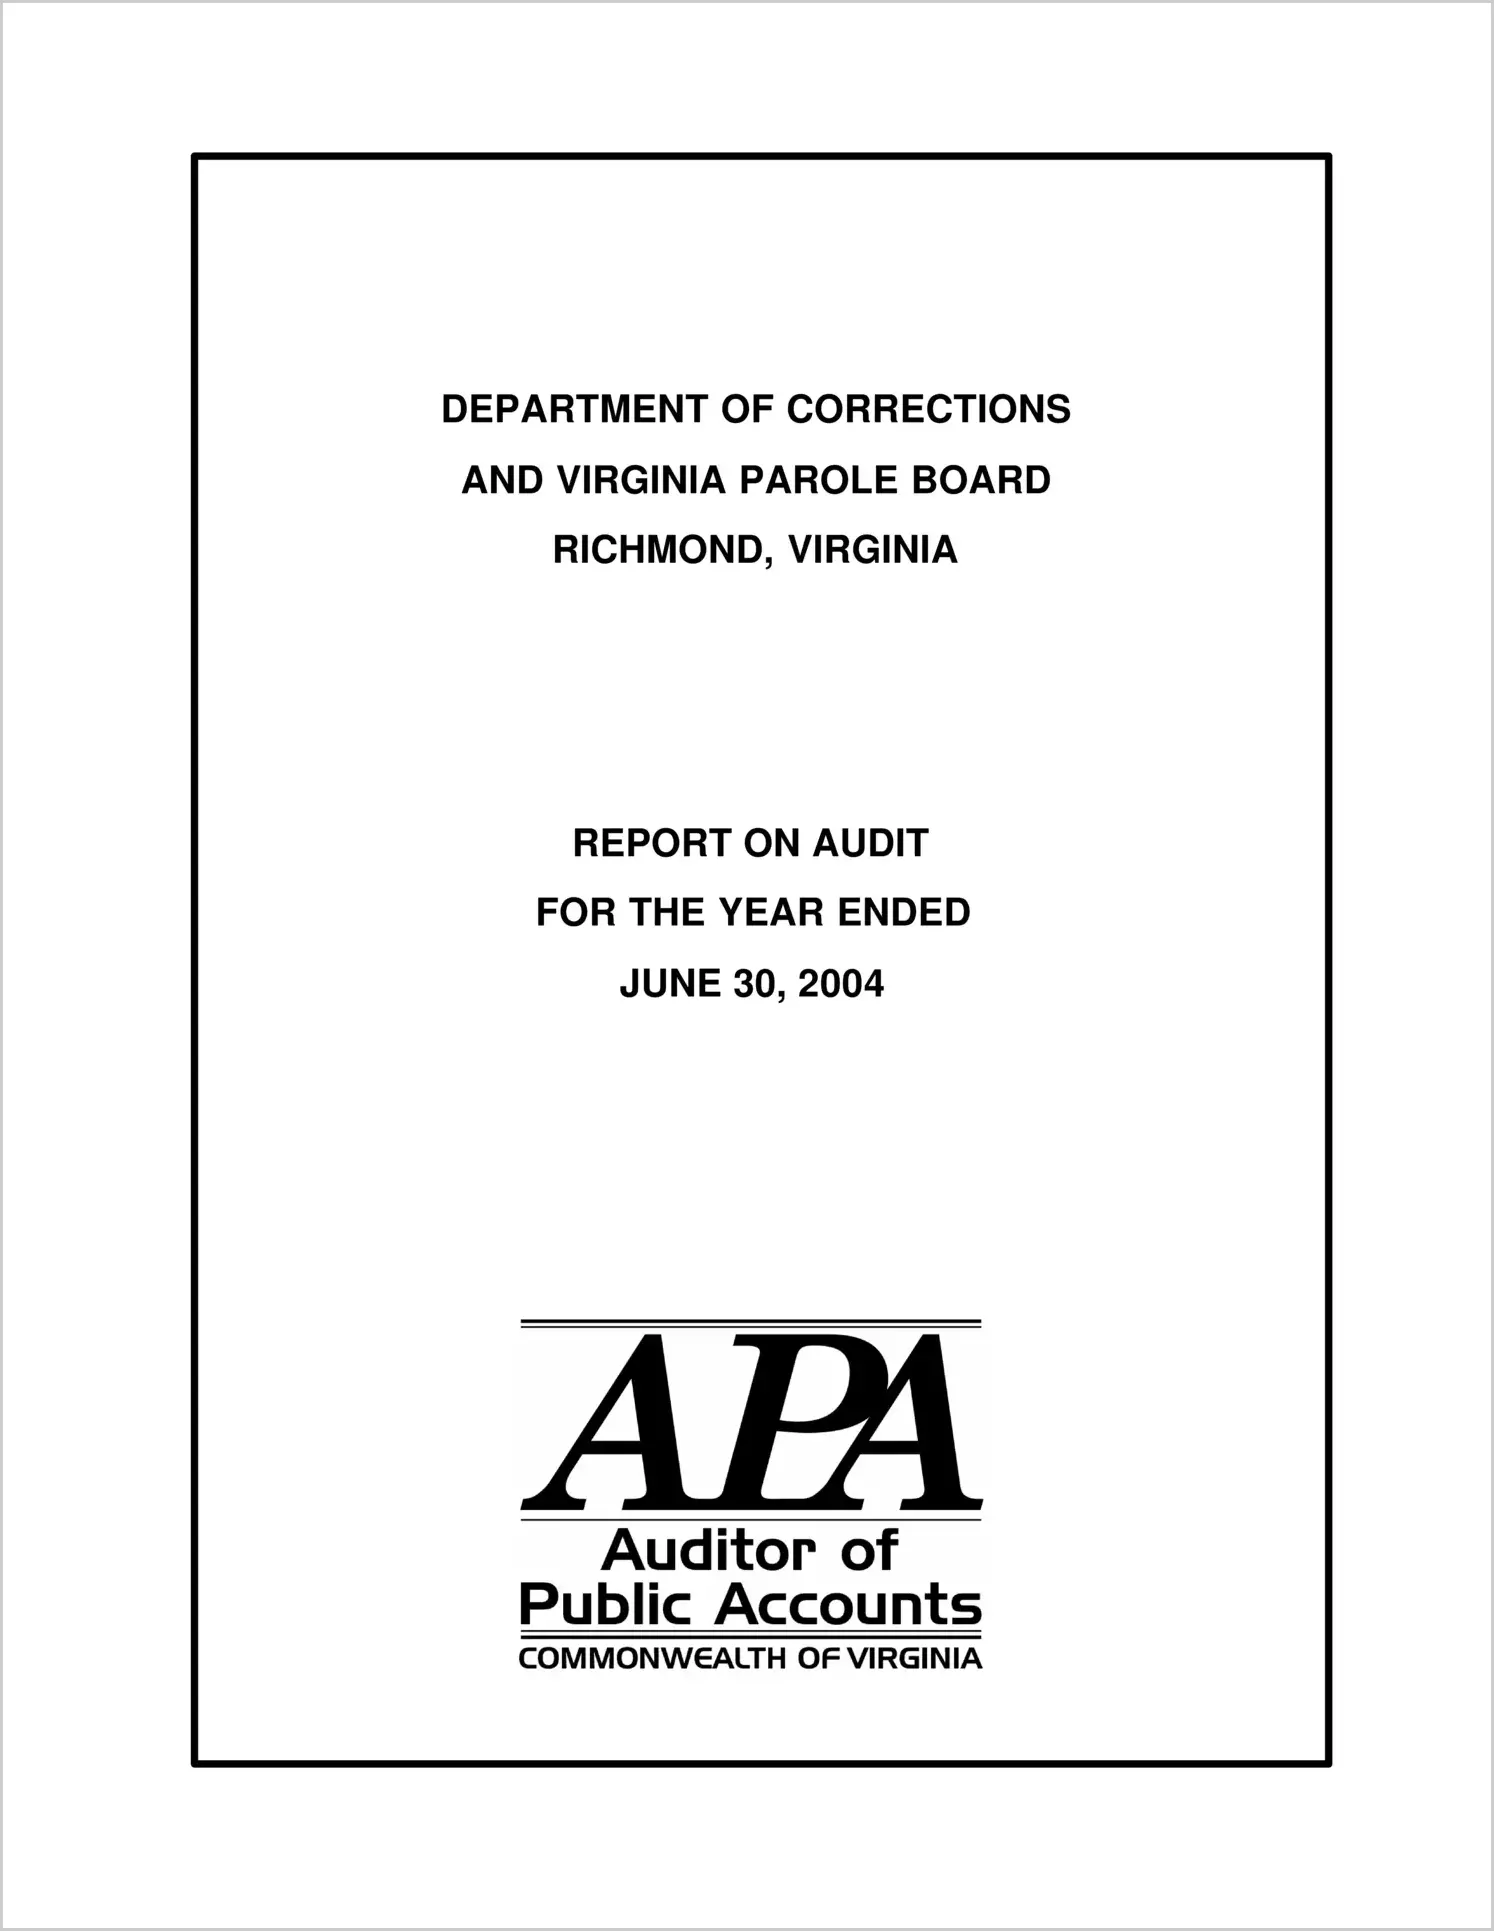 Department of Corrections and Virginia Parole Board for the year ended June 30, 2004